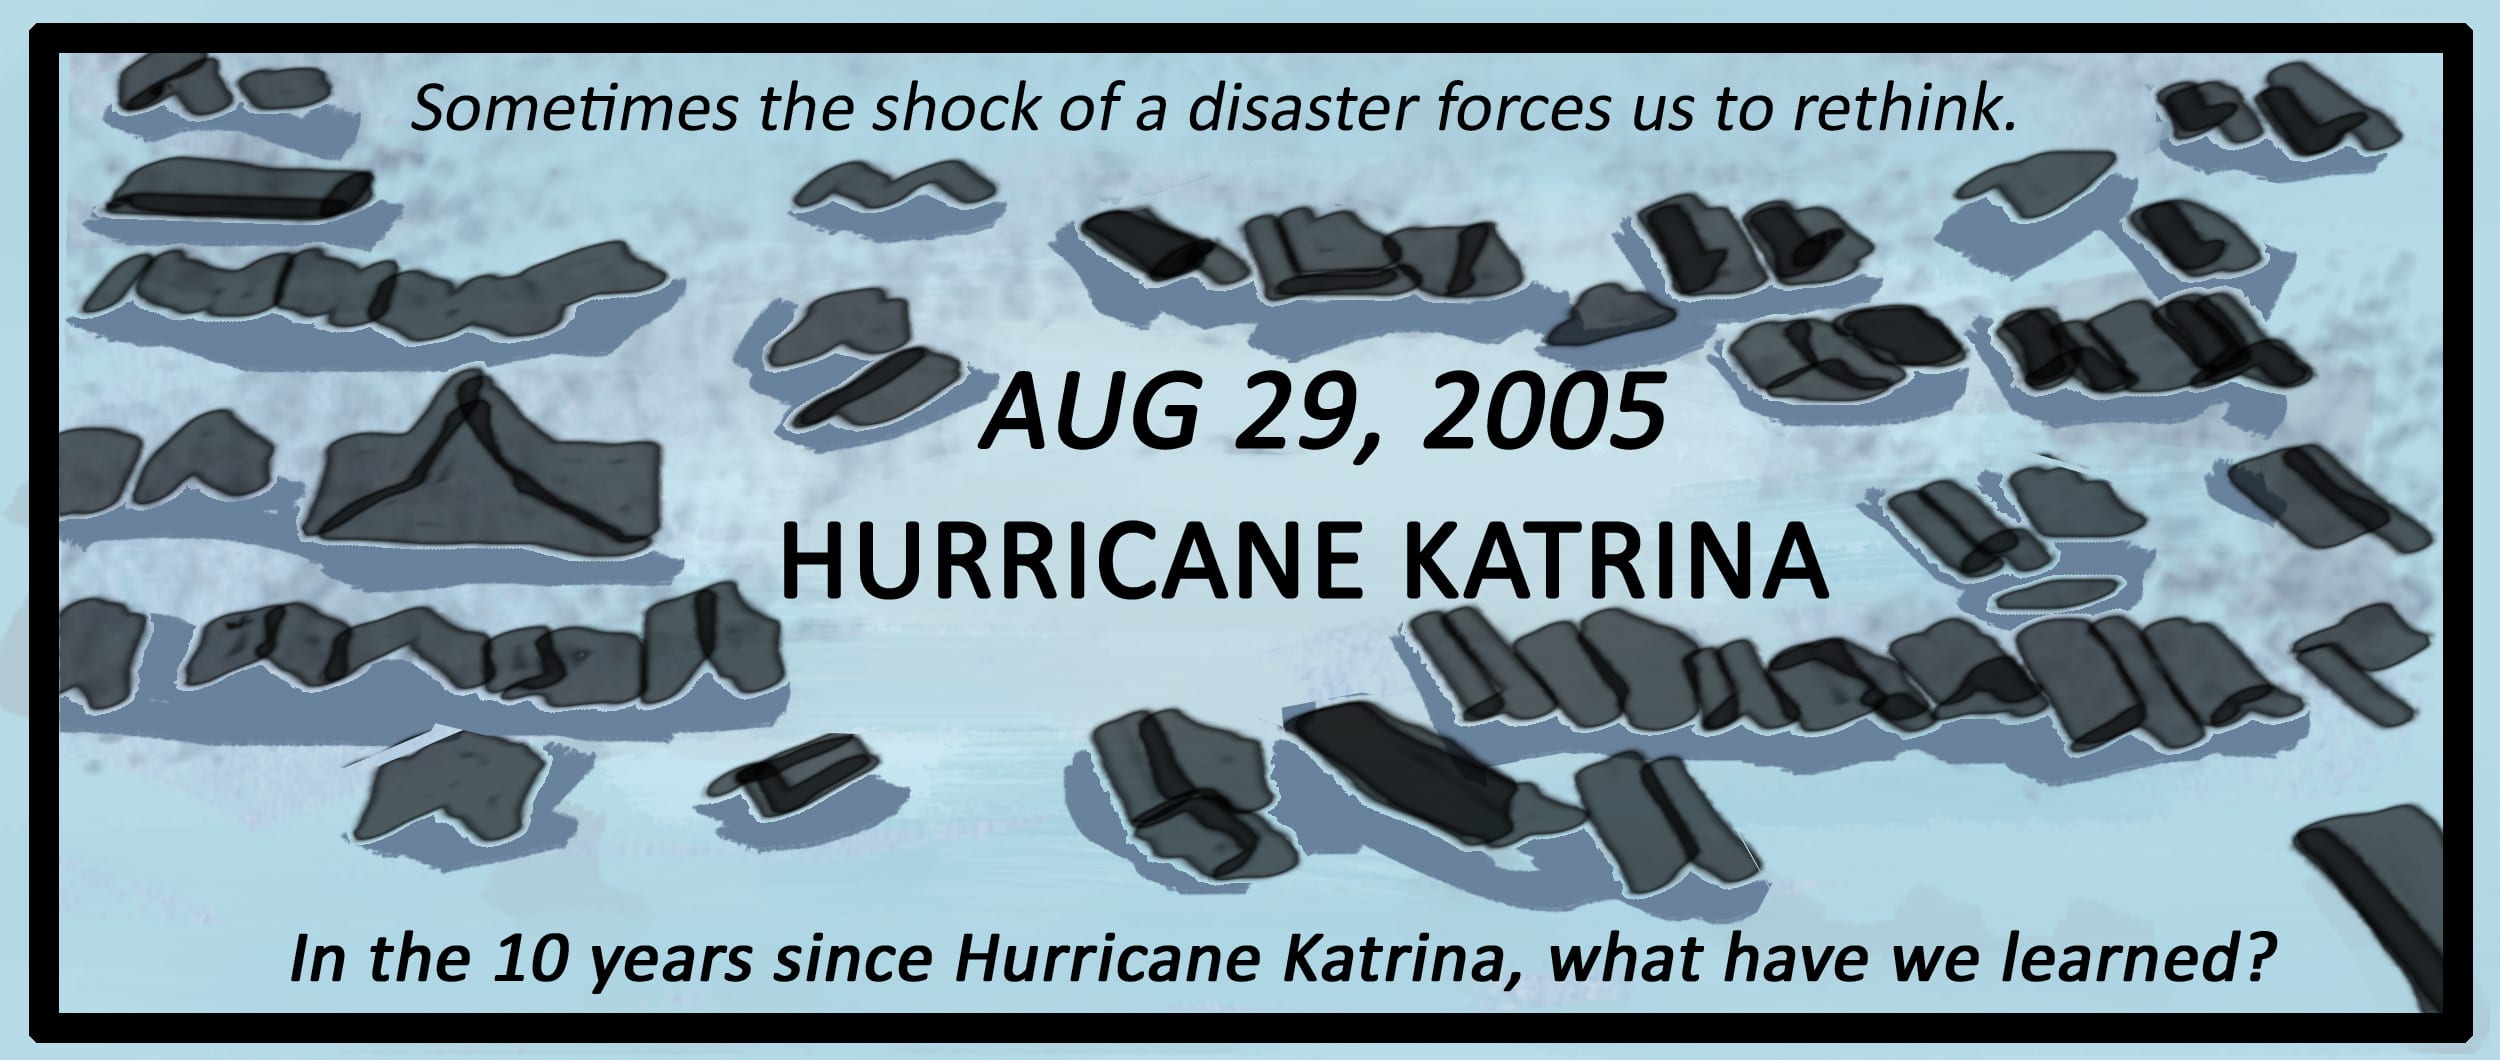 Sometimes the shock of a disaster forces us to rethink. In the 10 years since Hurricane Katrina, what have we learned